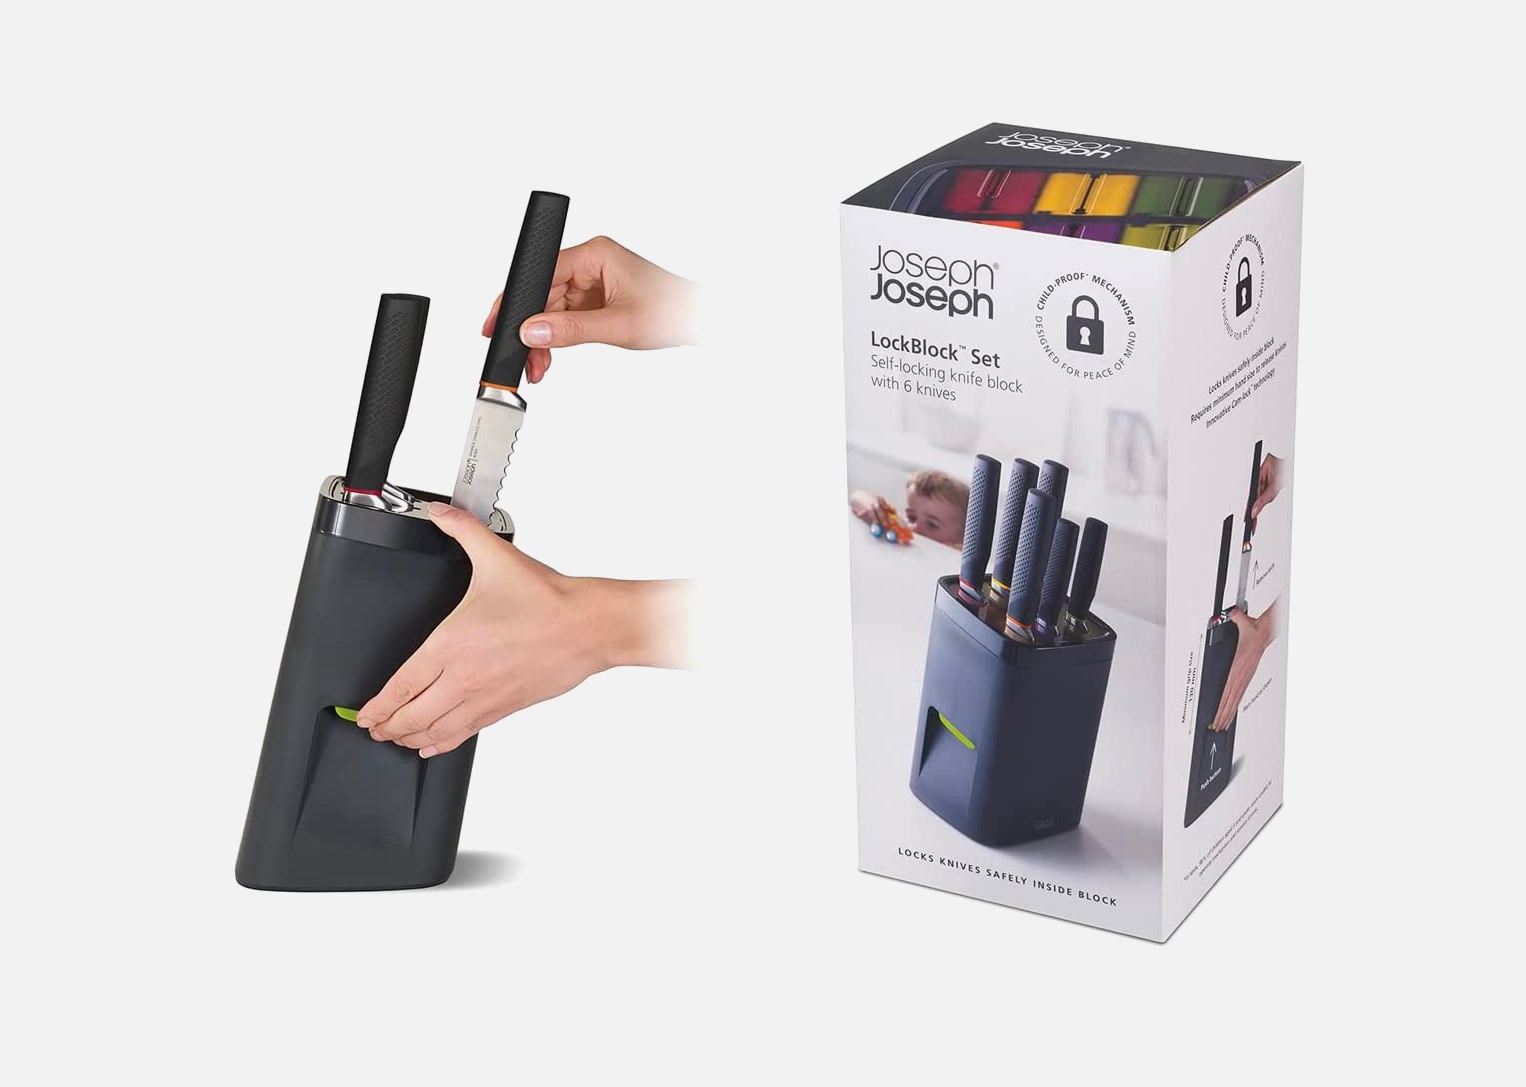 Product Of The Week: Child-proof Knife Set